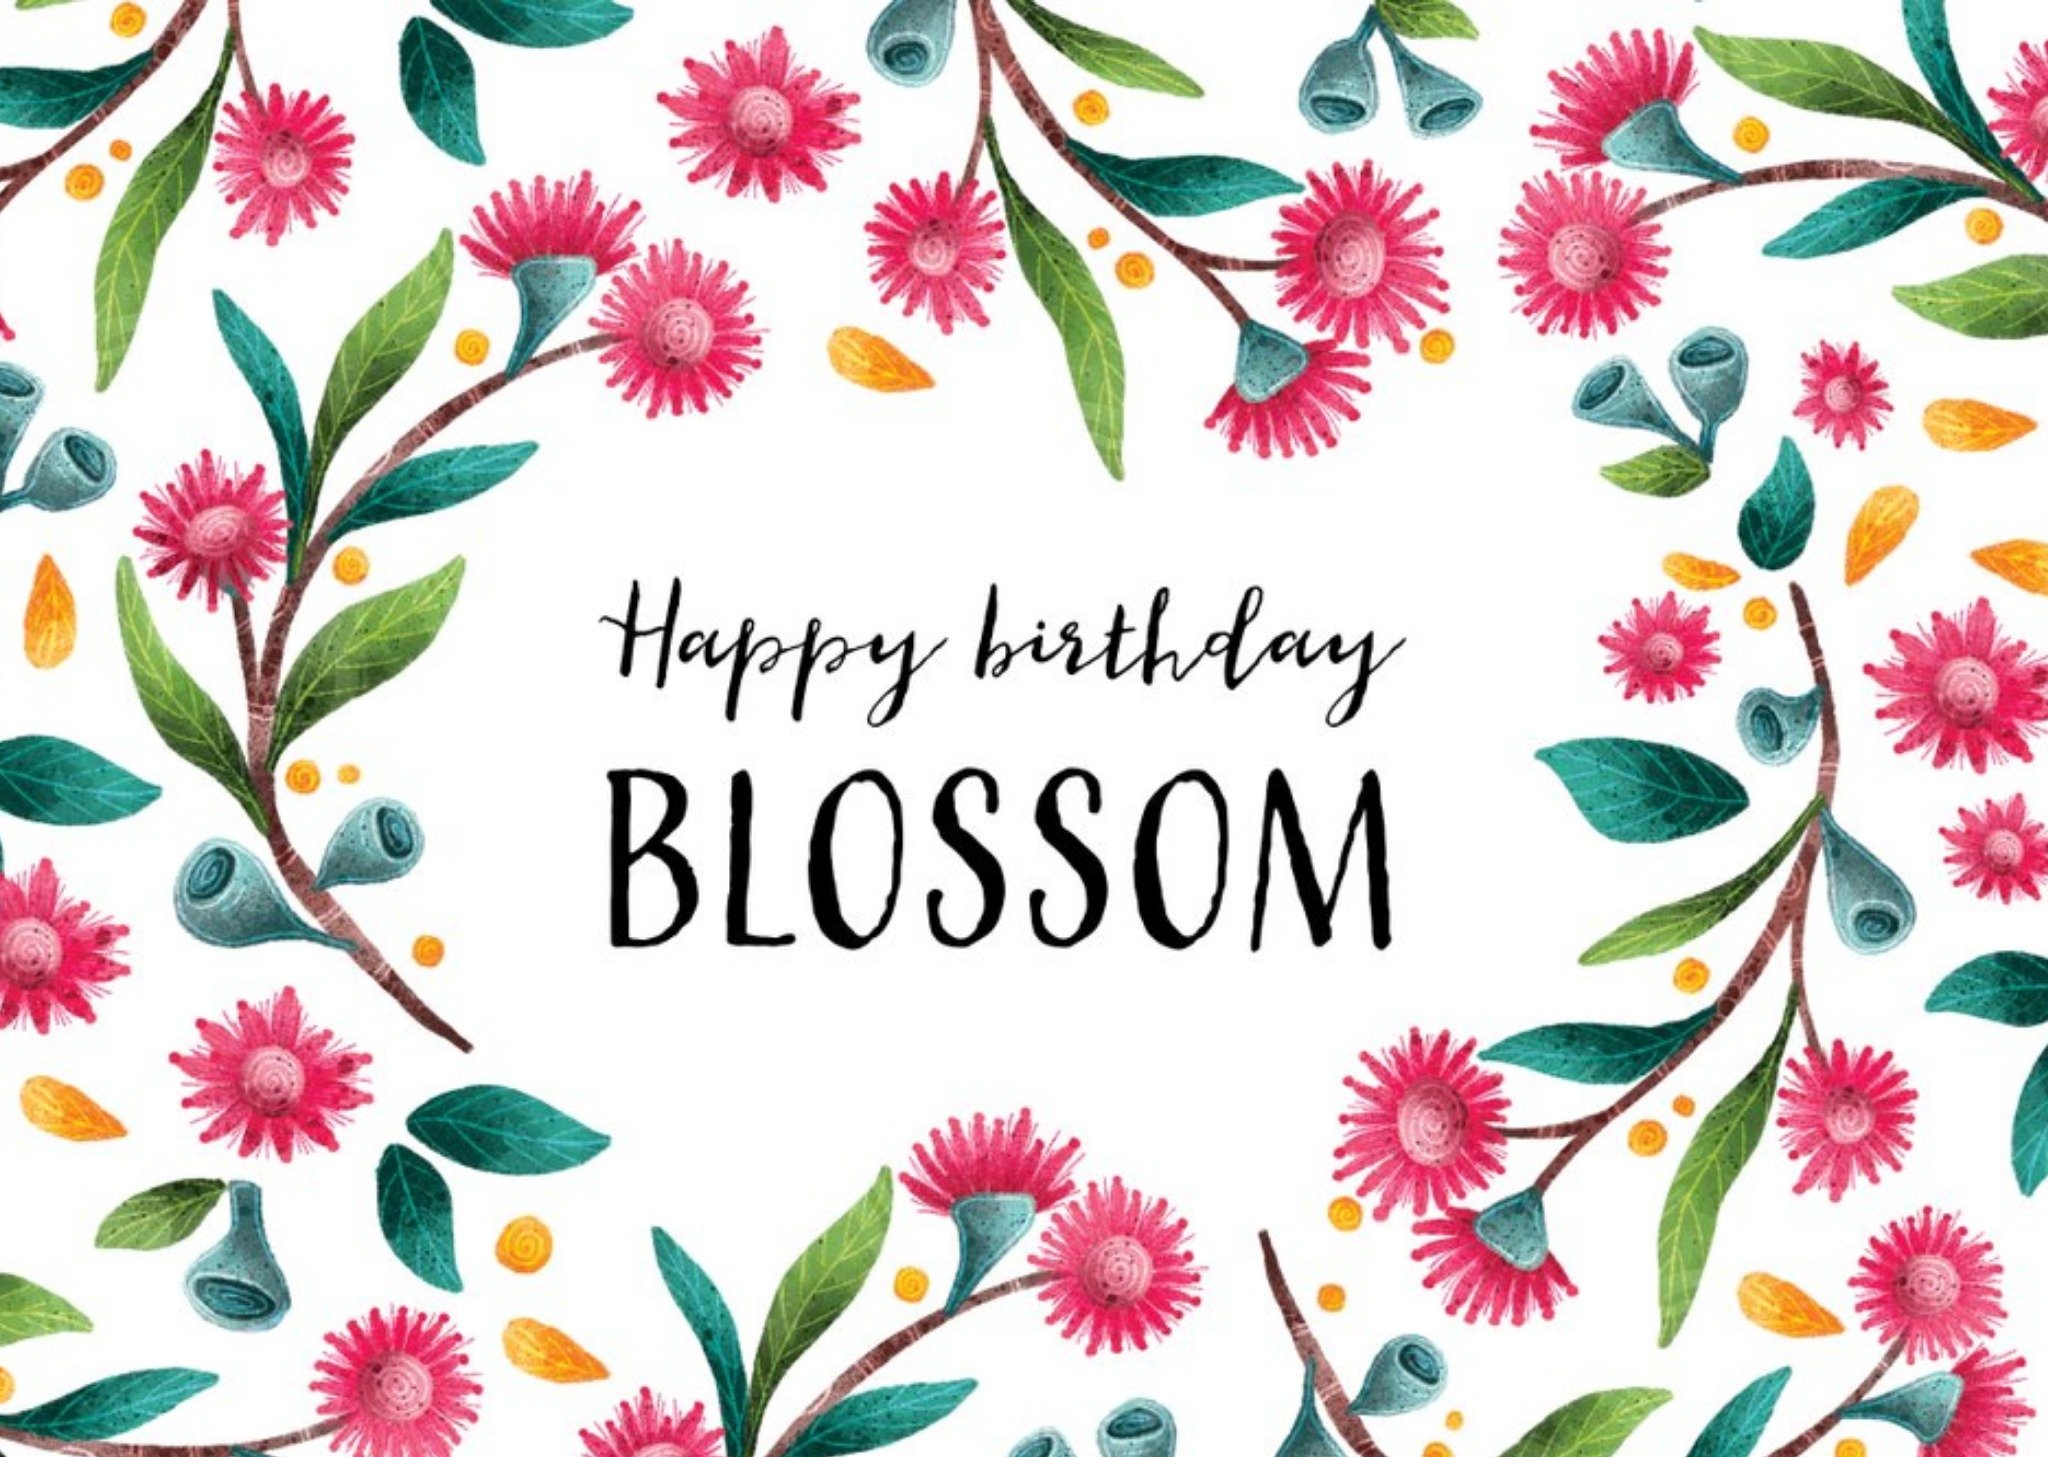 Moonpig Stray Leaves Illustrated Floral Blossom Birthday Card, Large